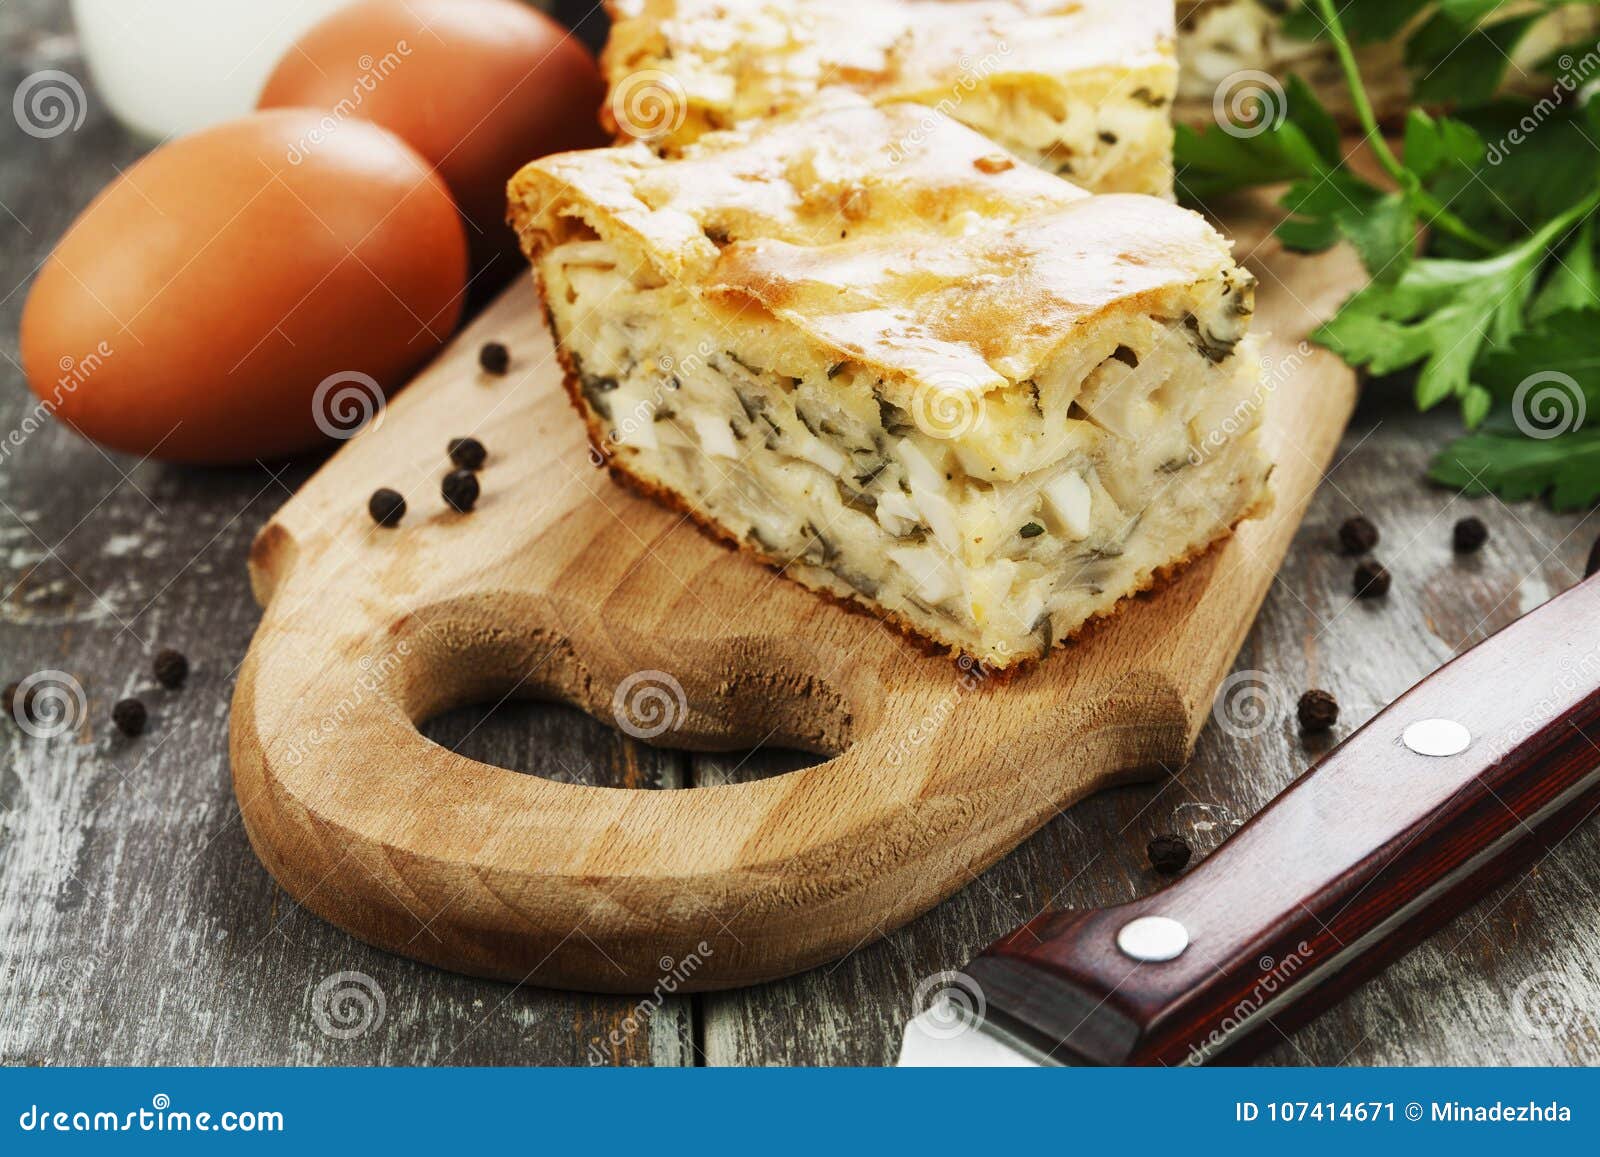 Pie with cabbage and eggs stock image. Image of ceramic - 107414671